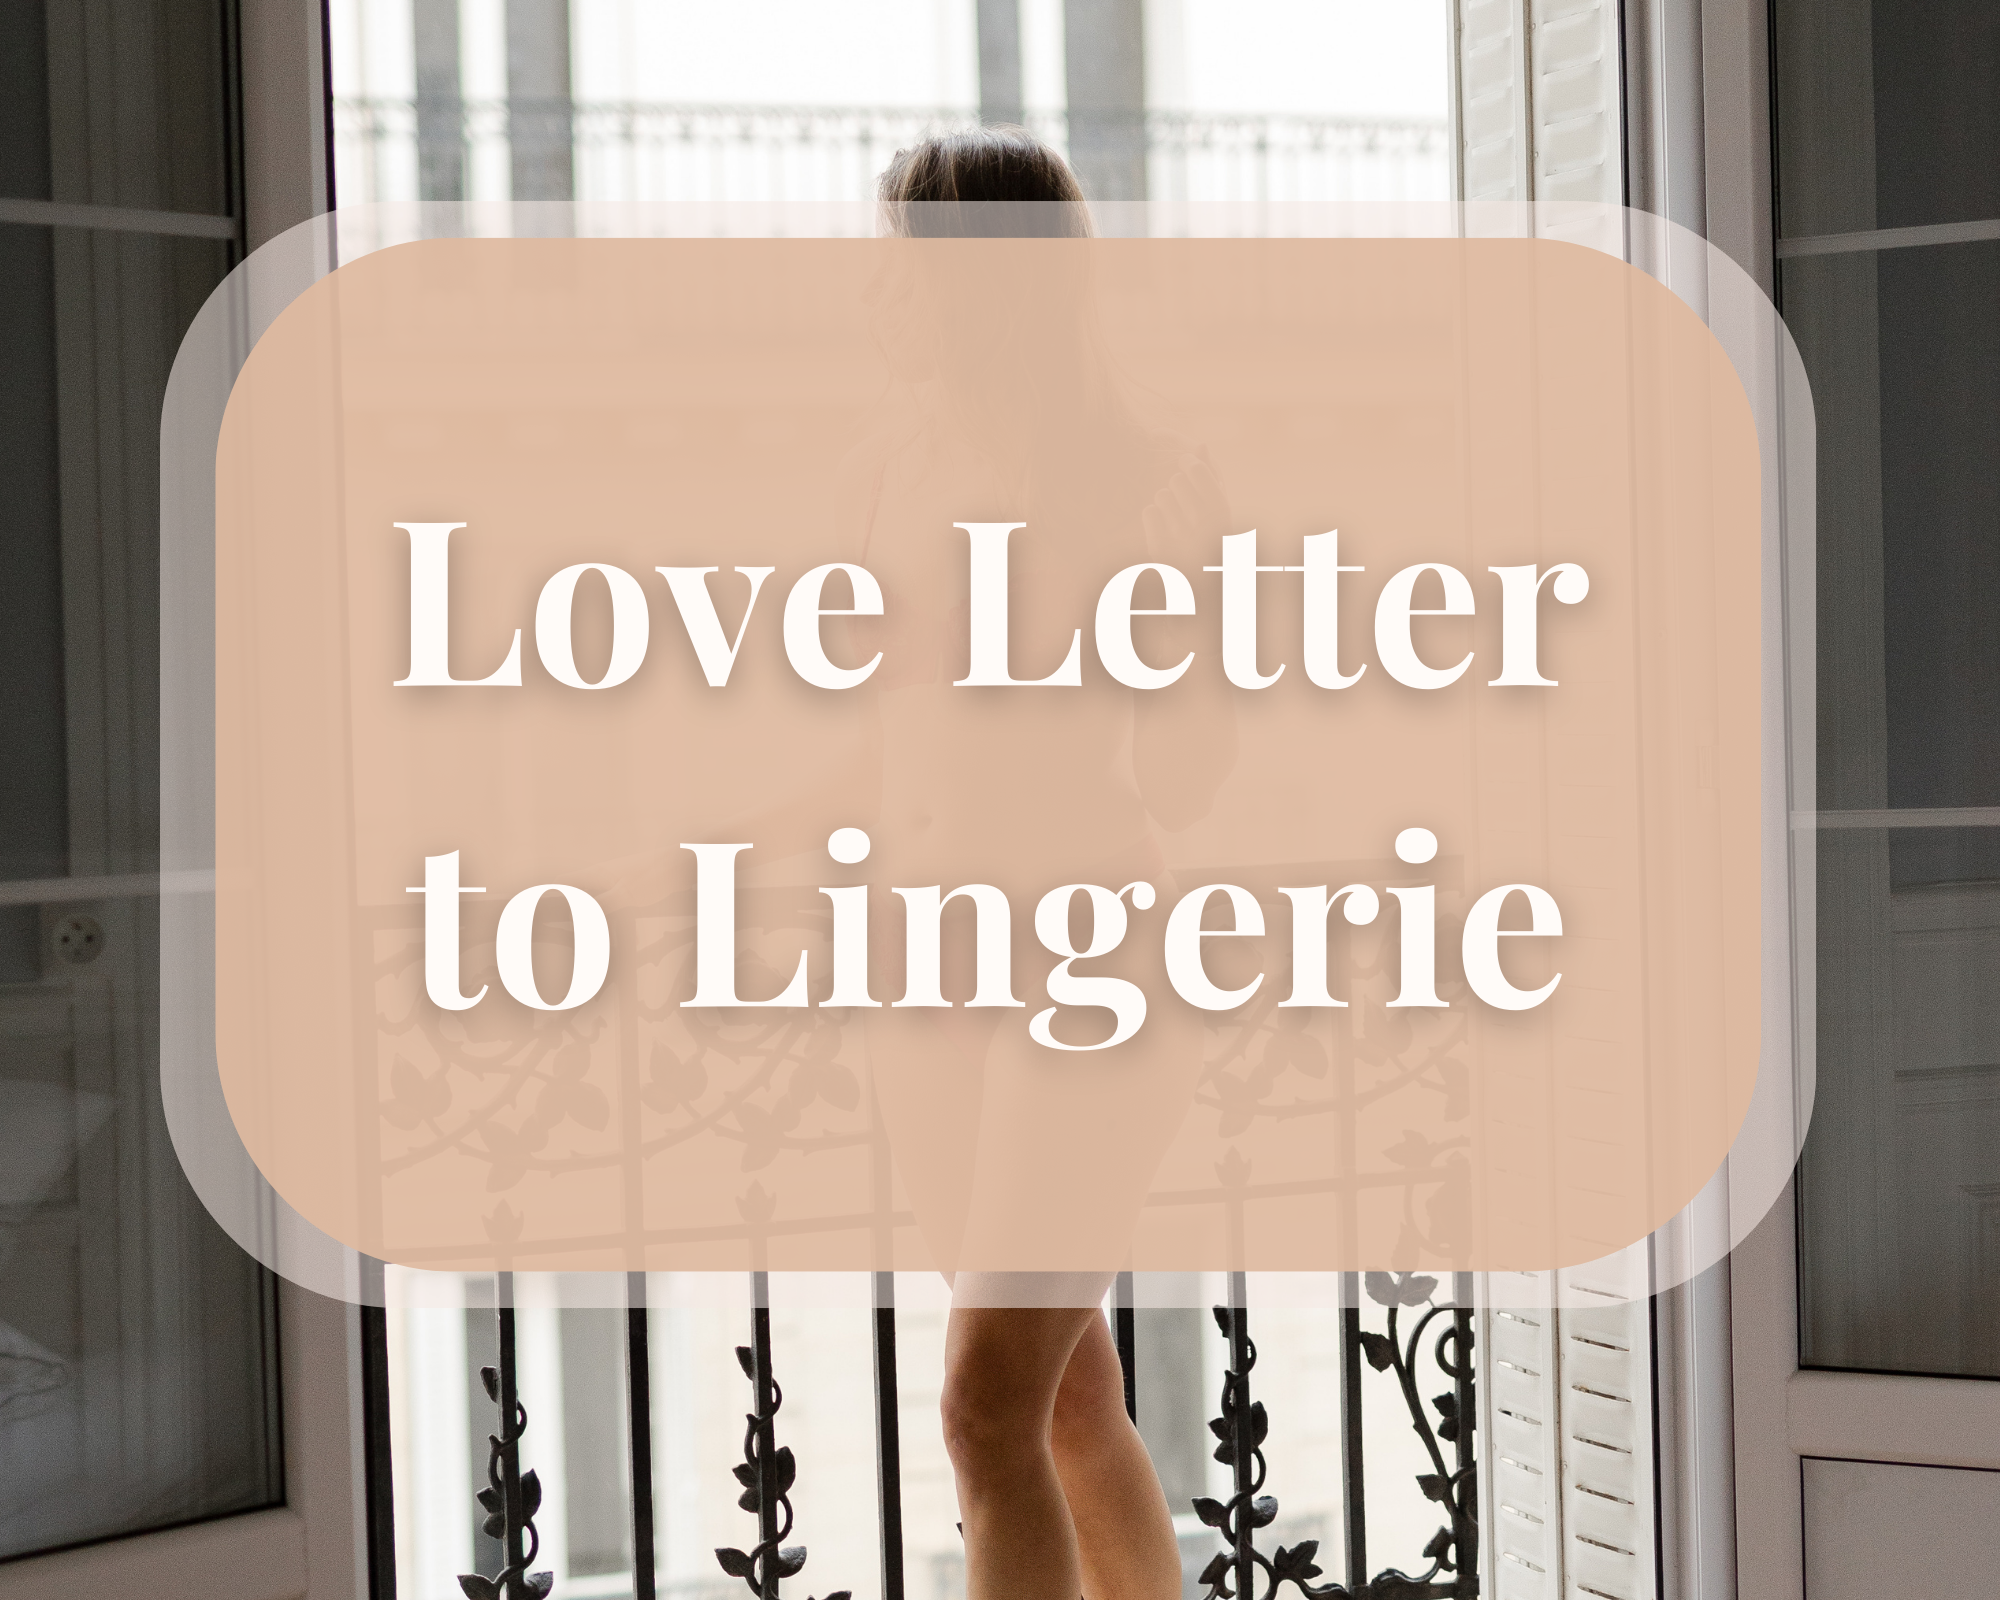 love letter to lingerie by Kate Marley